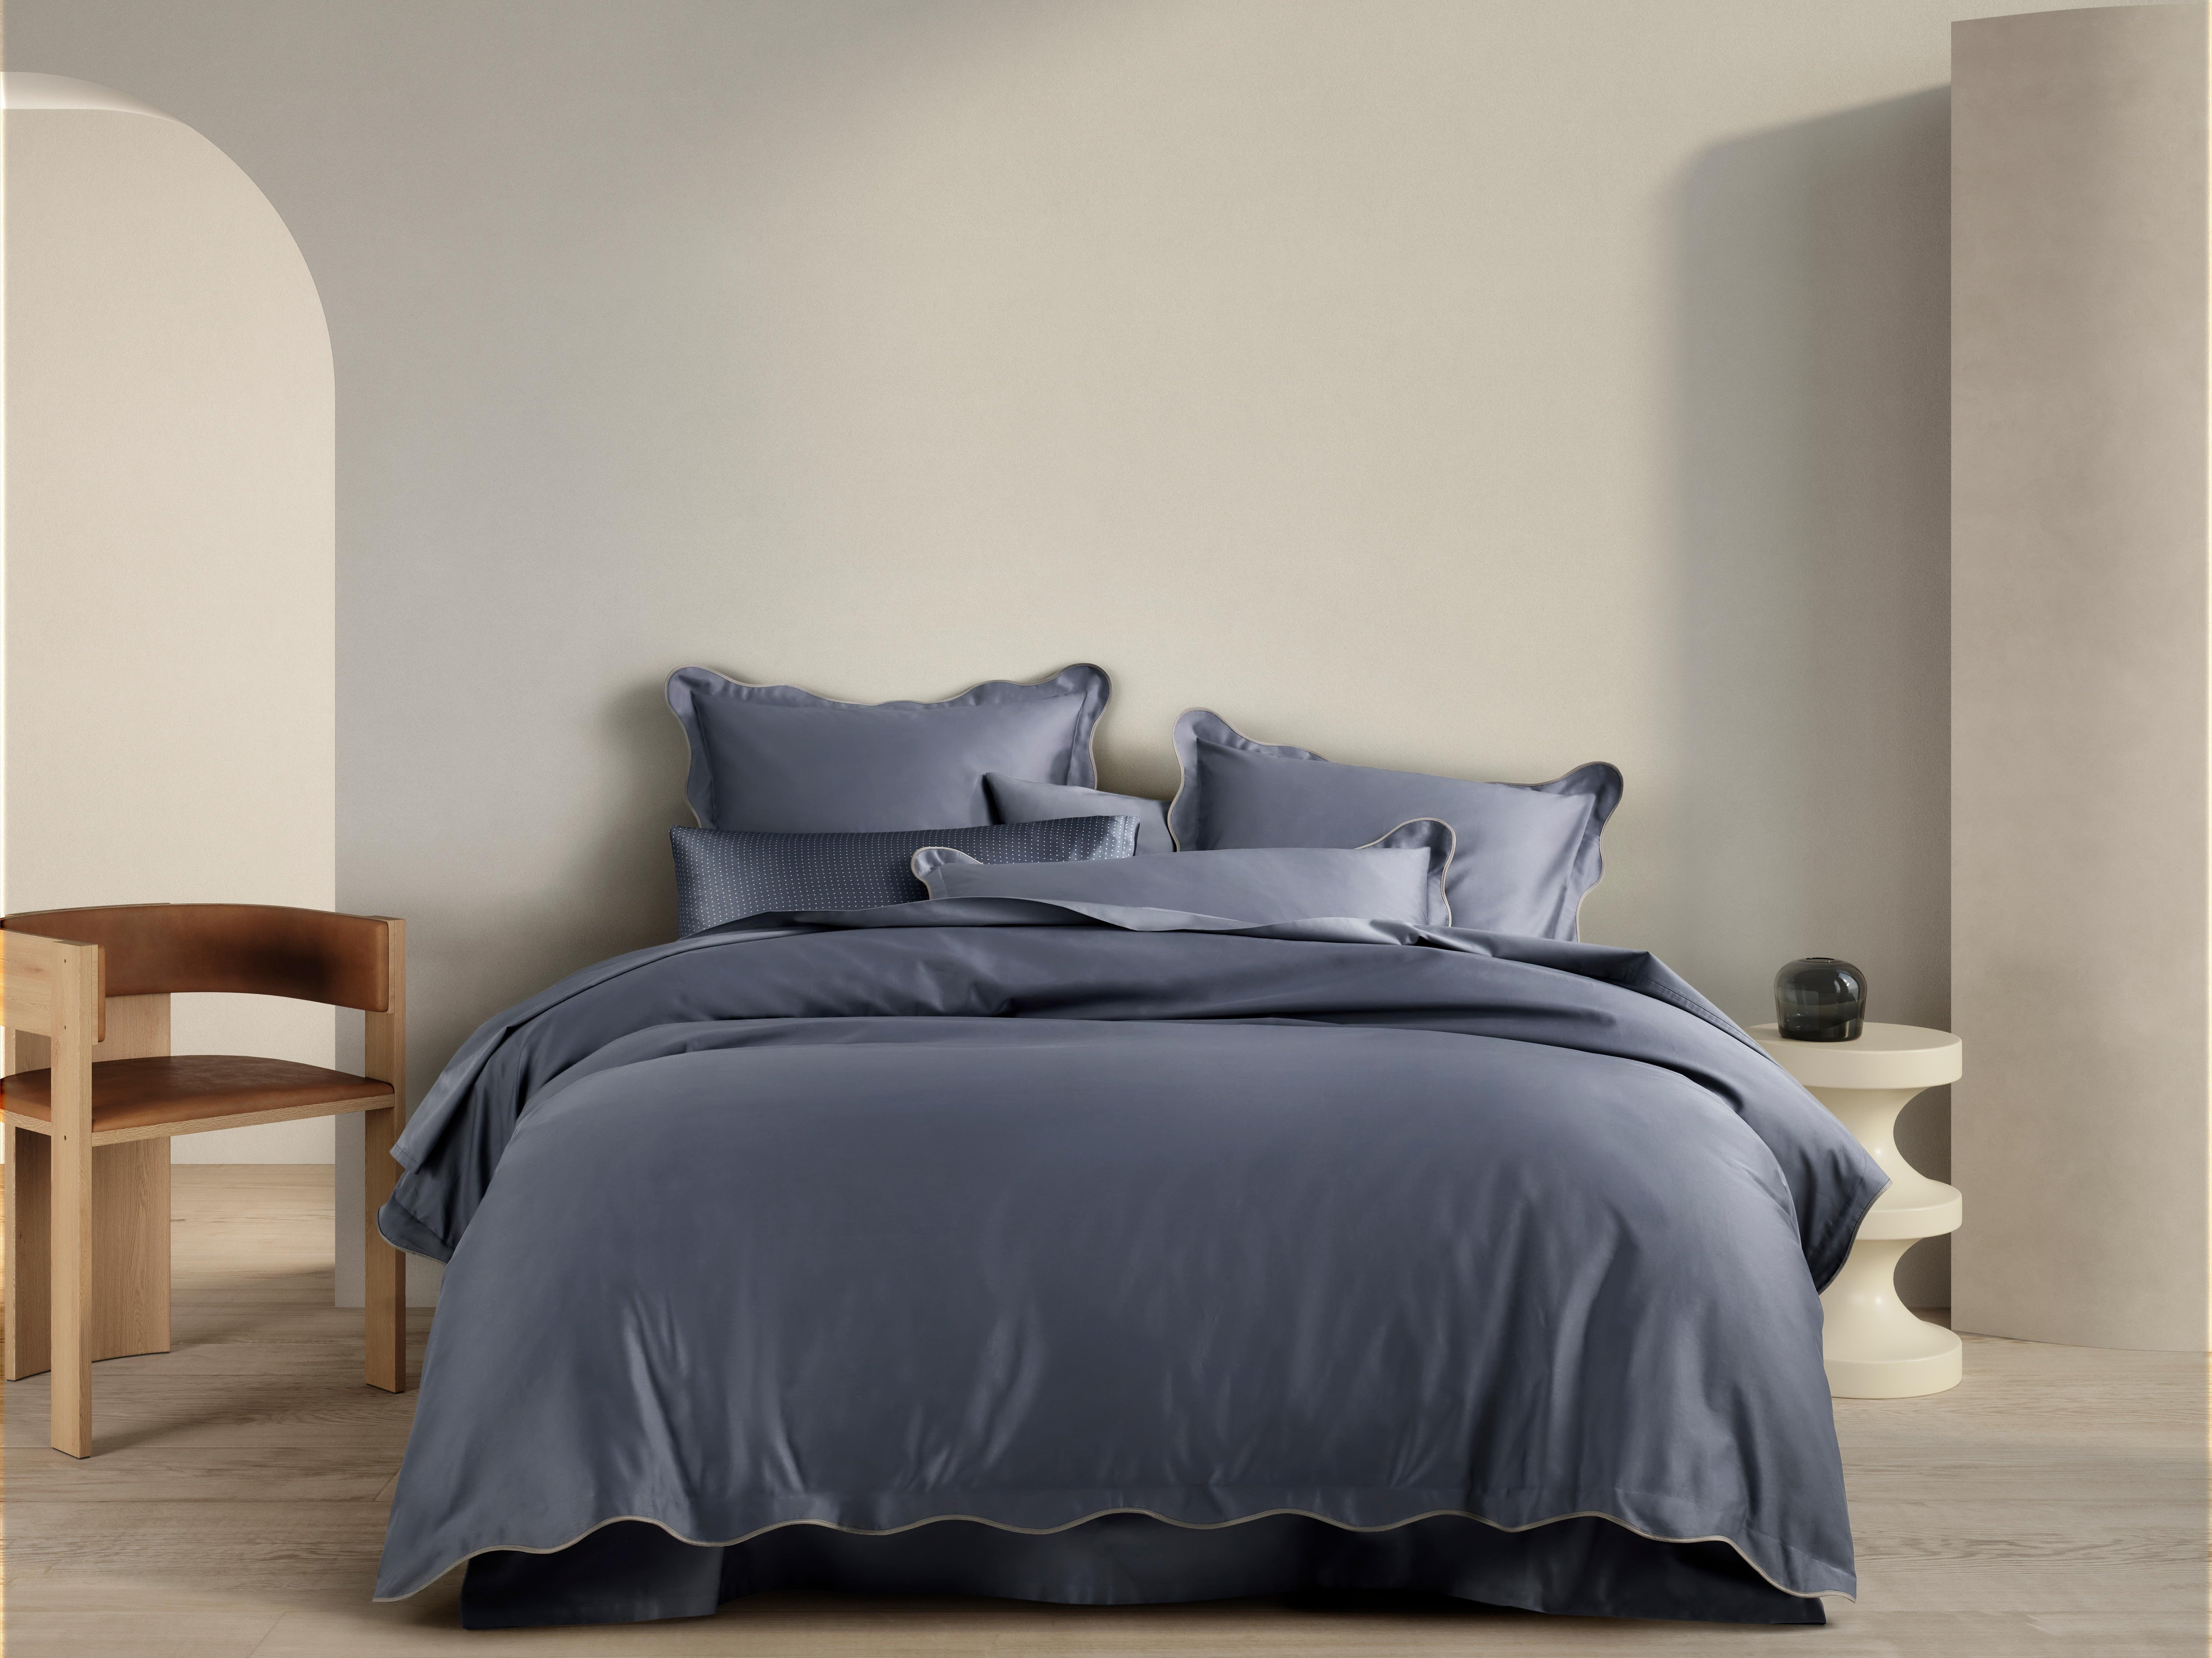 You got it covered: a Tamber quilt set in smokey blue